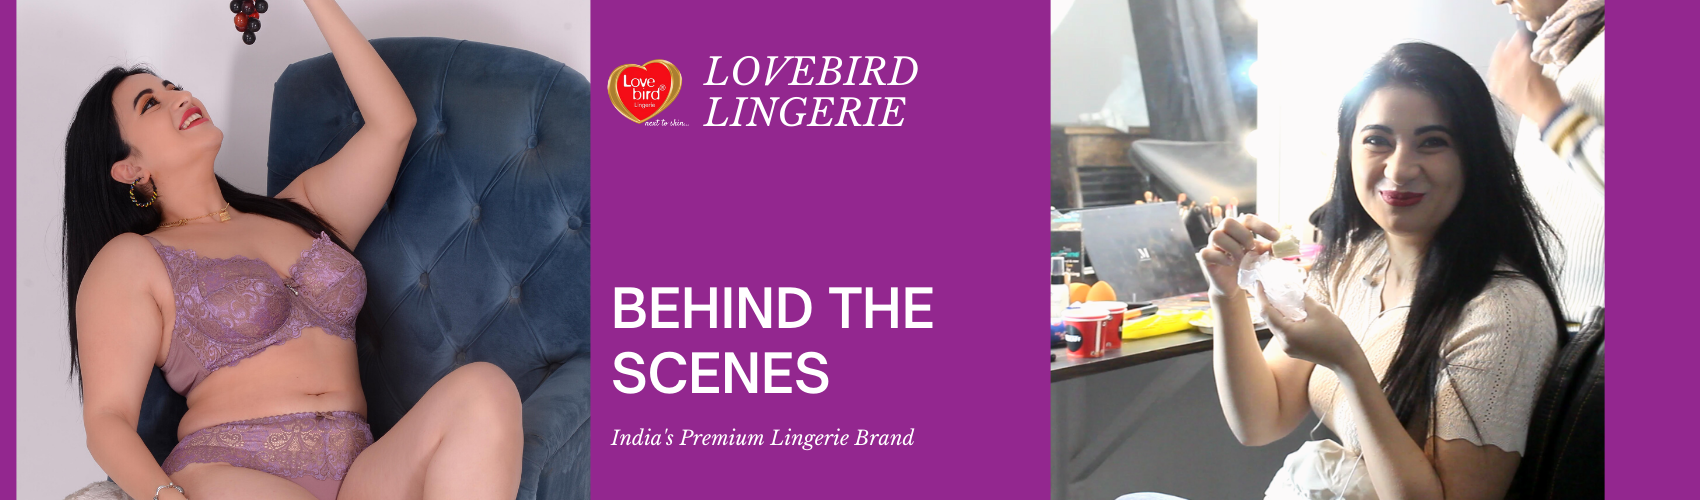 Commercial Indian Lingerie Photoshoot, BEHIND THE SCNES, Lovebird Lingerie  ®, BTS